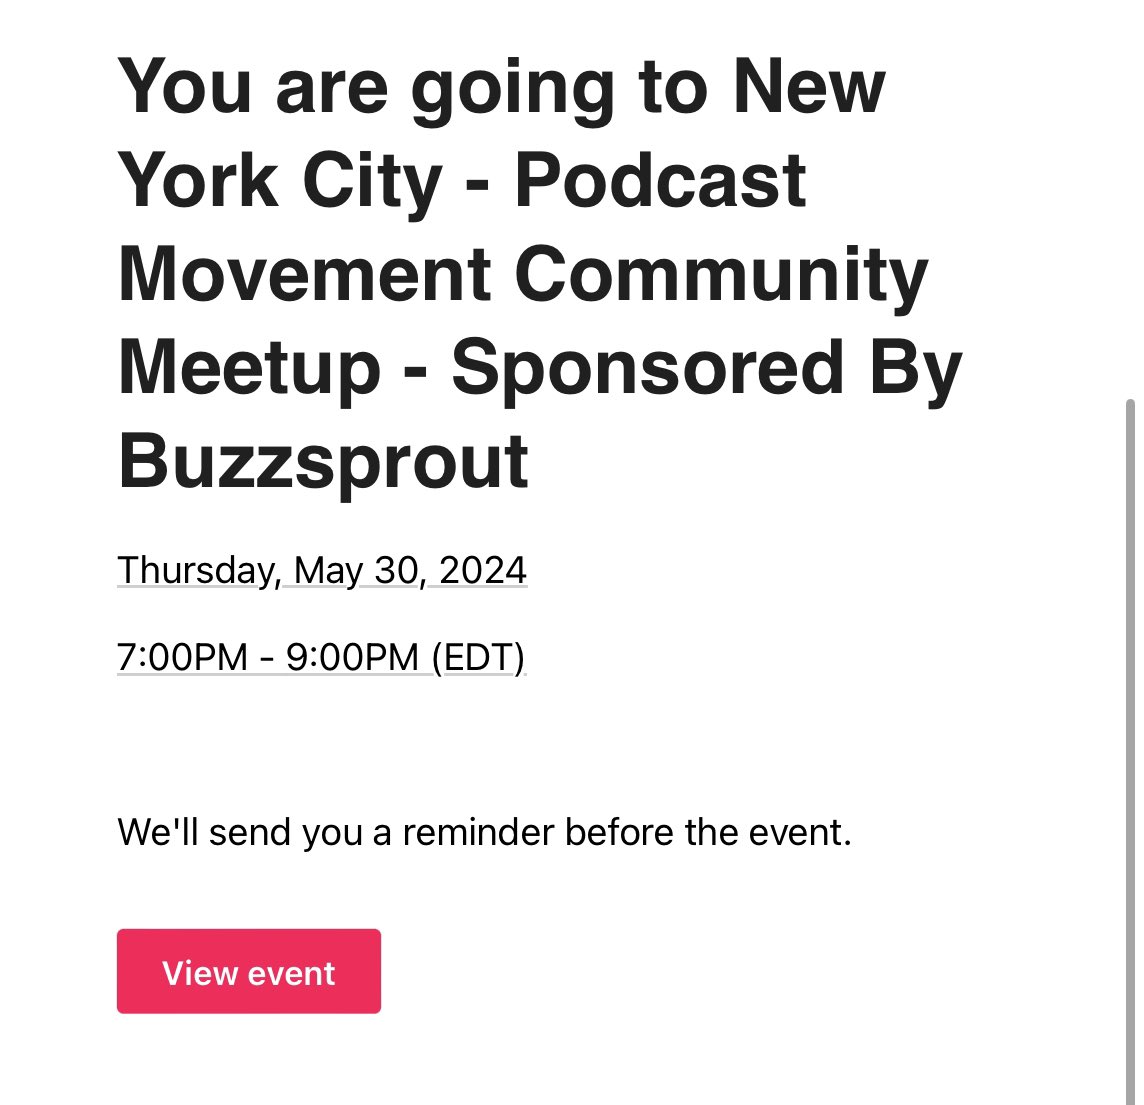 See you on May 30th, @buzzsprout ; @PodcastMovement members from #nyc!